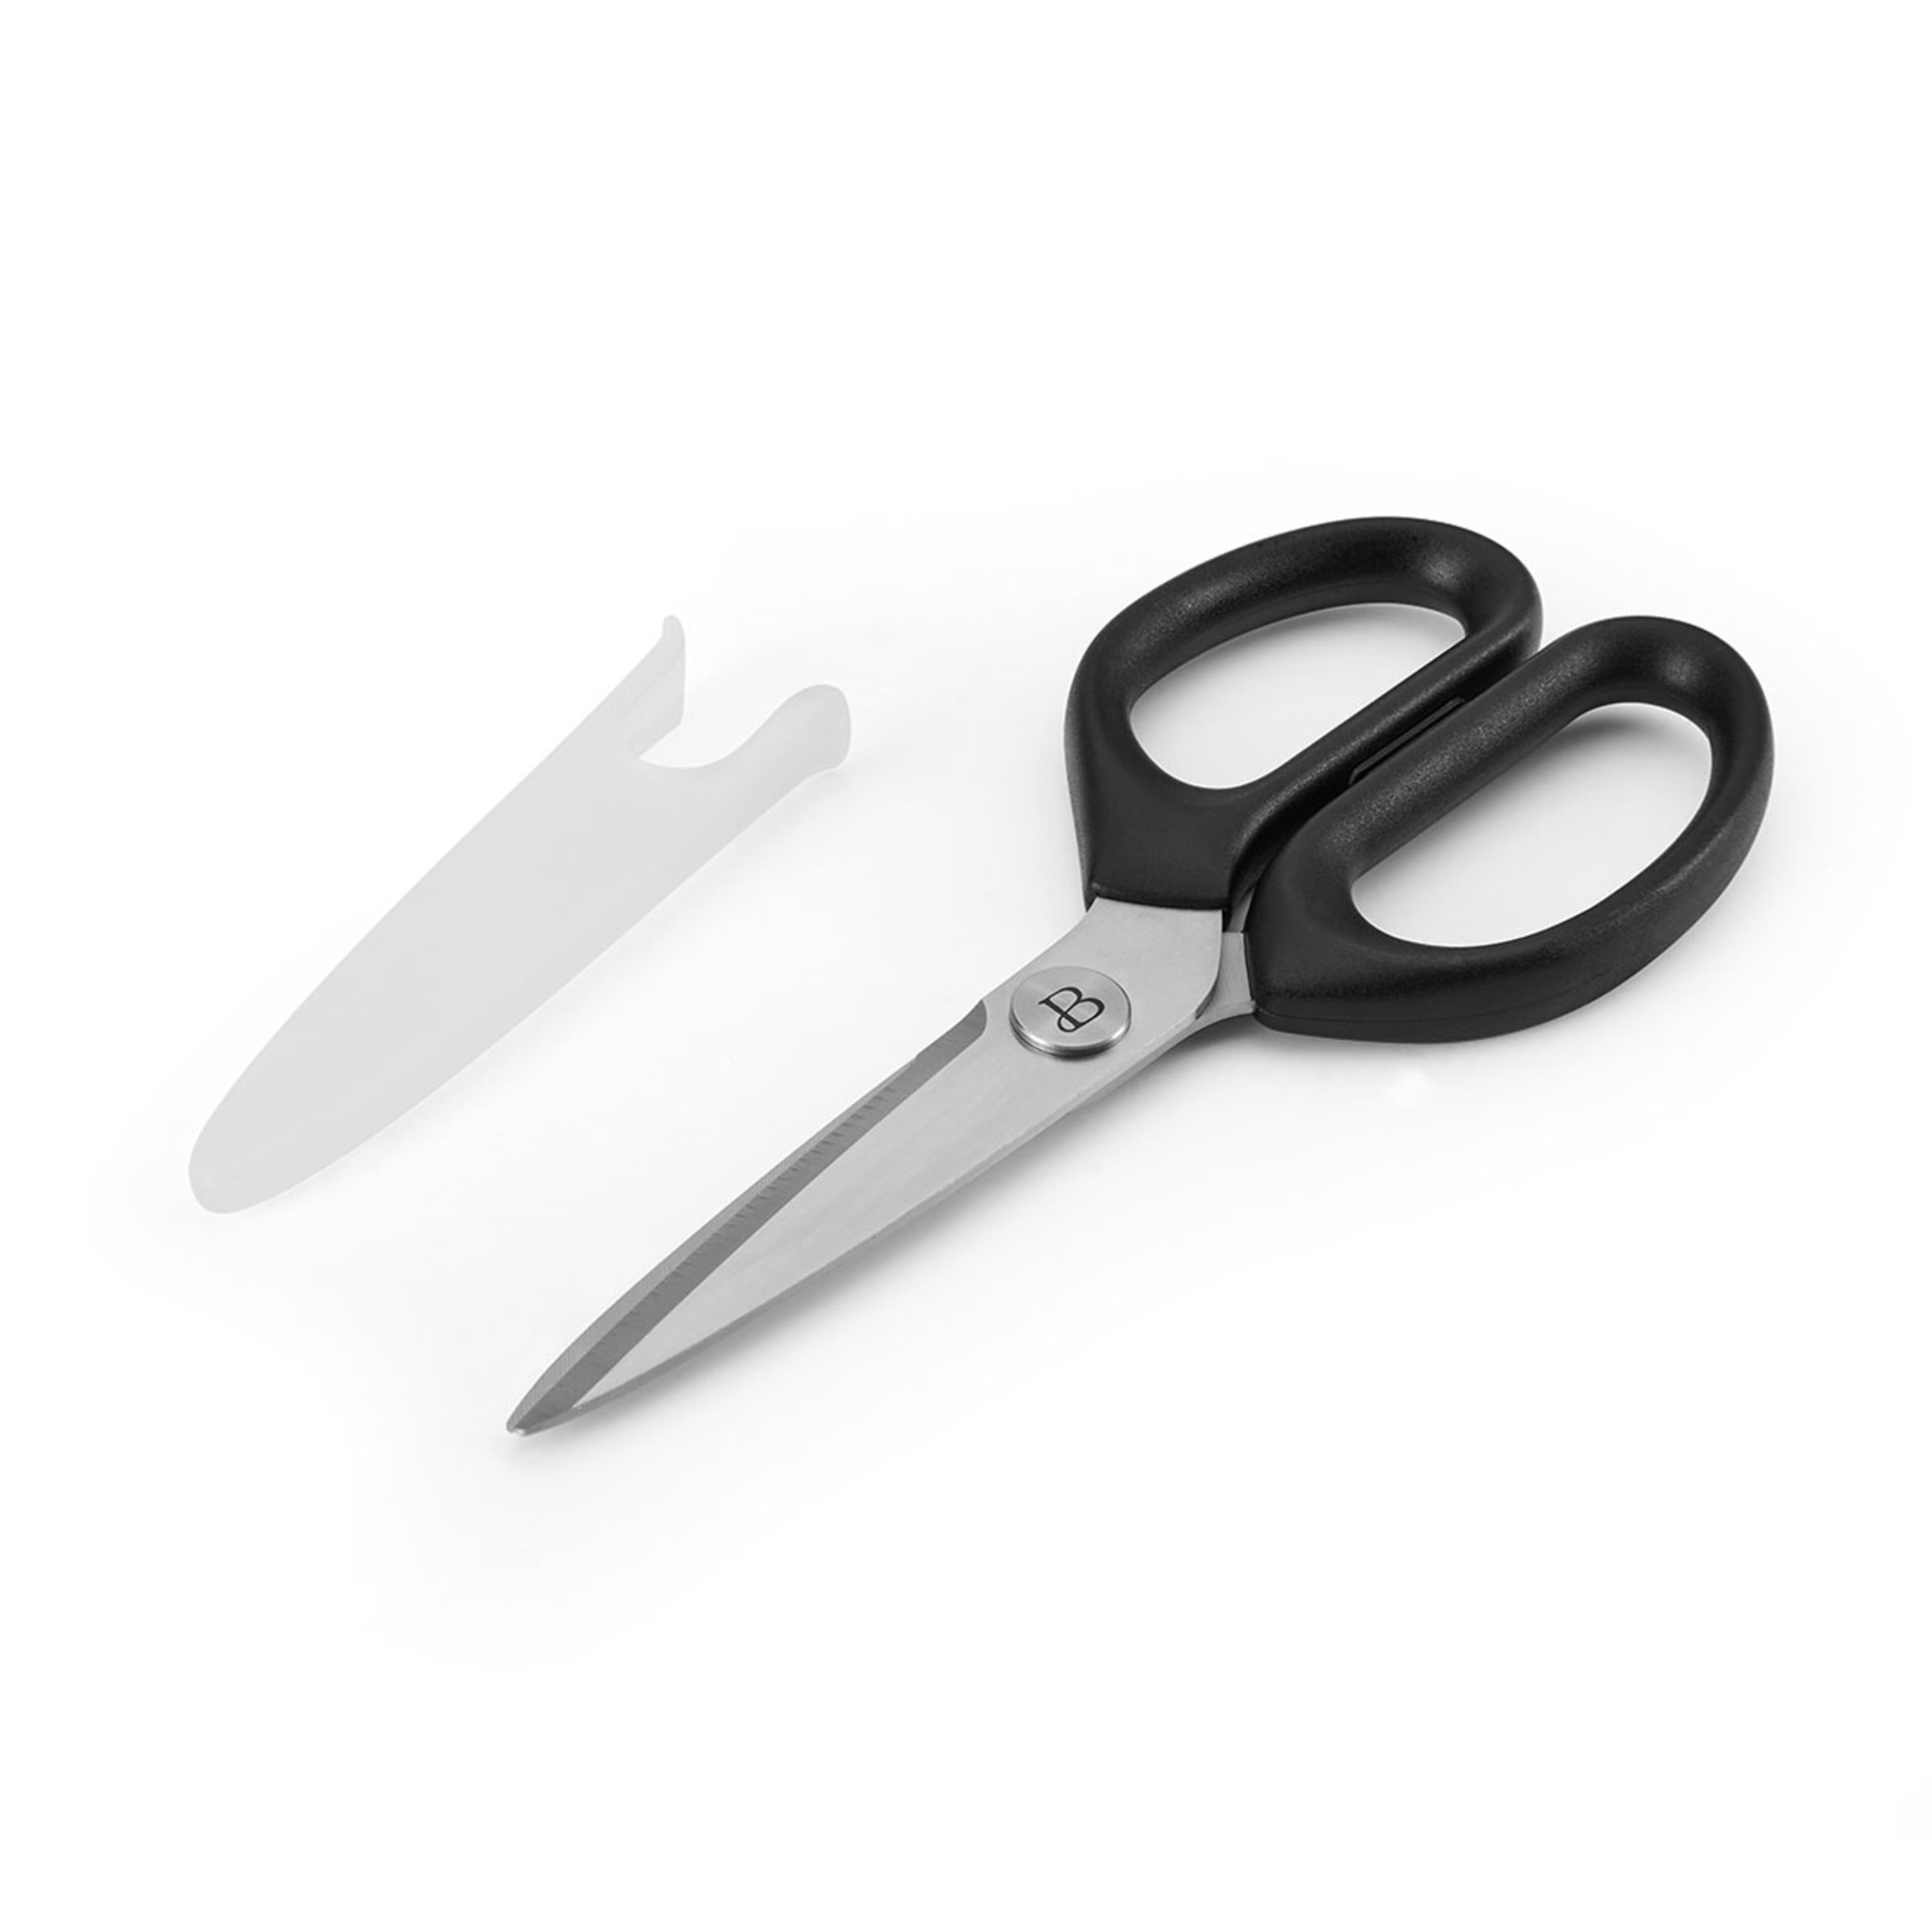 Beautiful Stainless Steel Kitchen Scissors with Blade Cover in